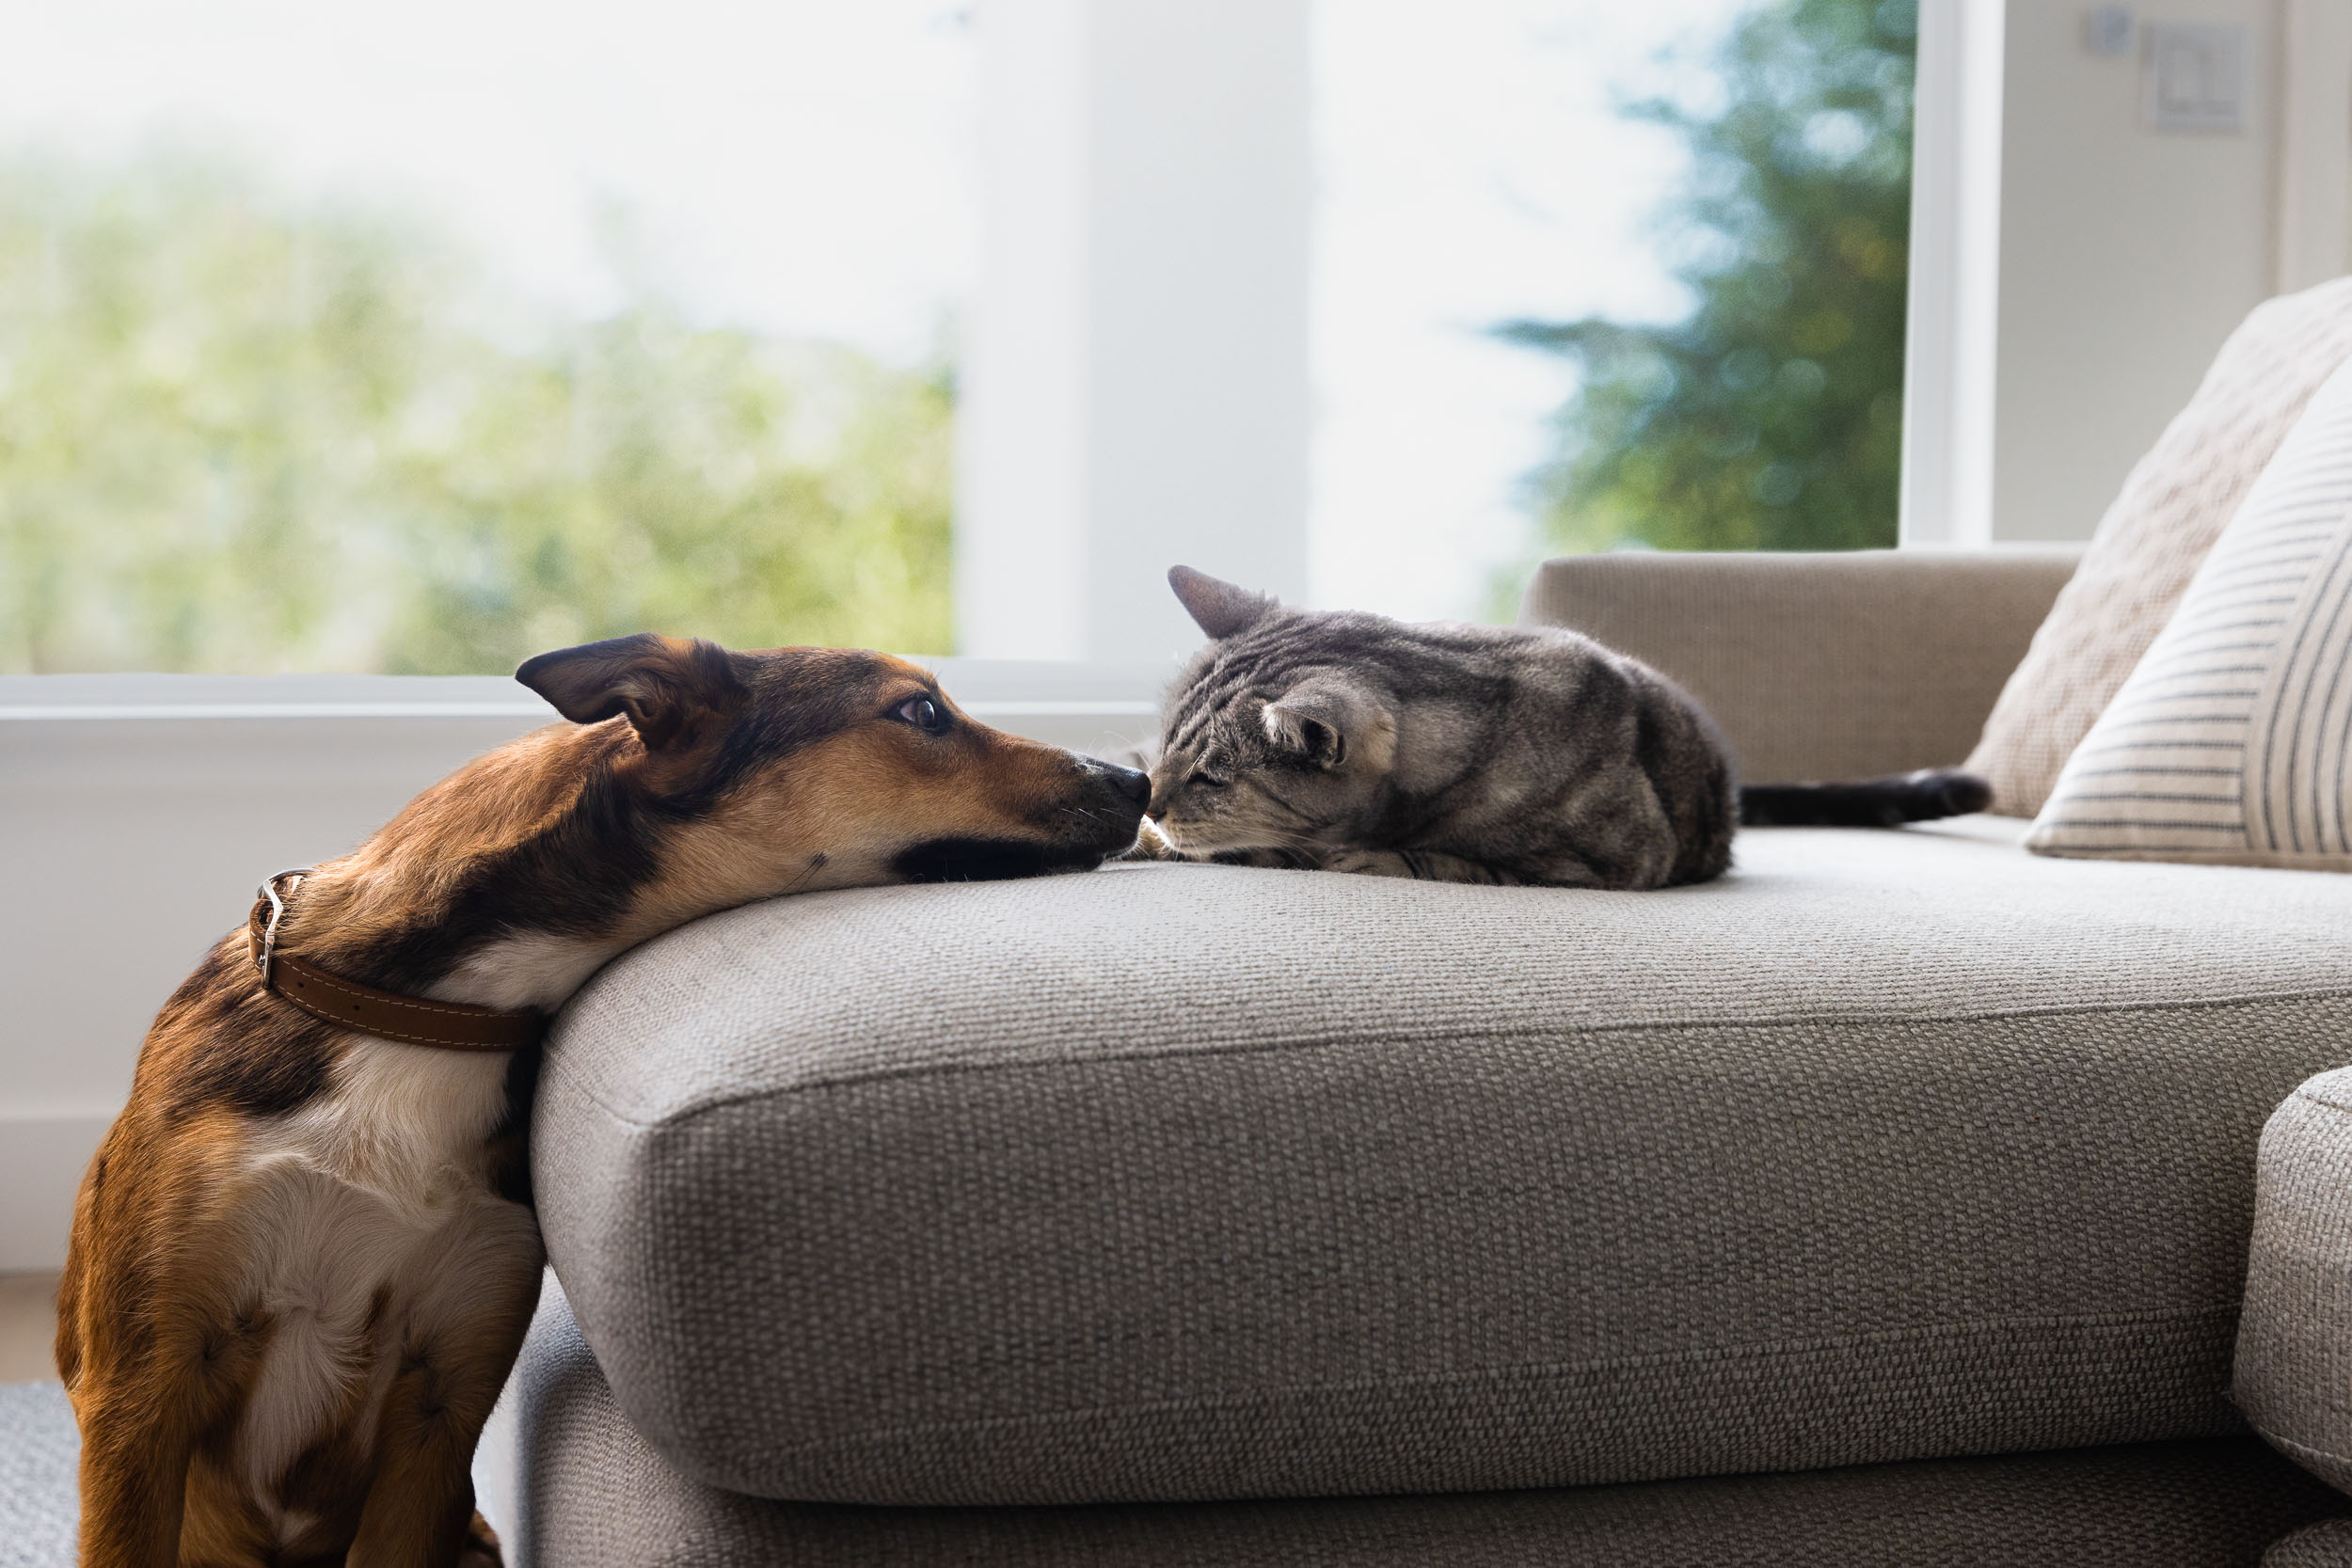 Dog and cat touching noses